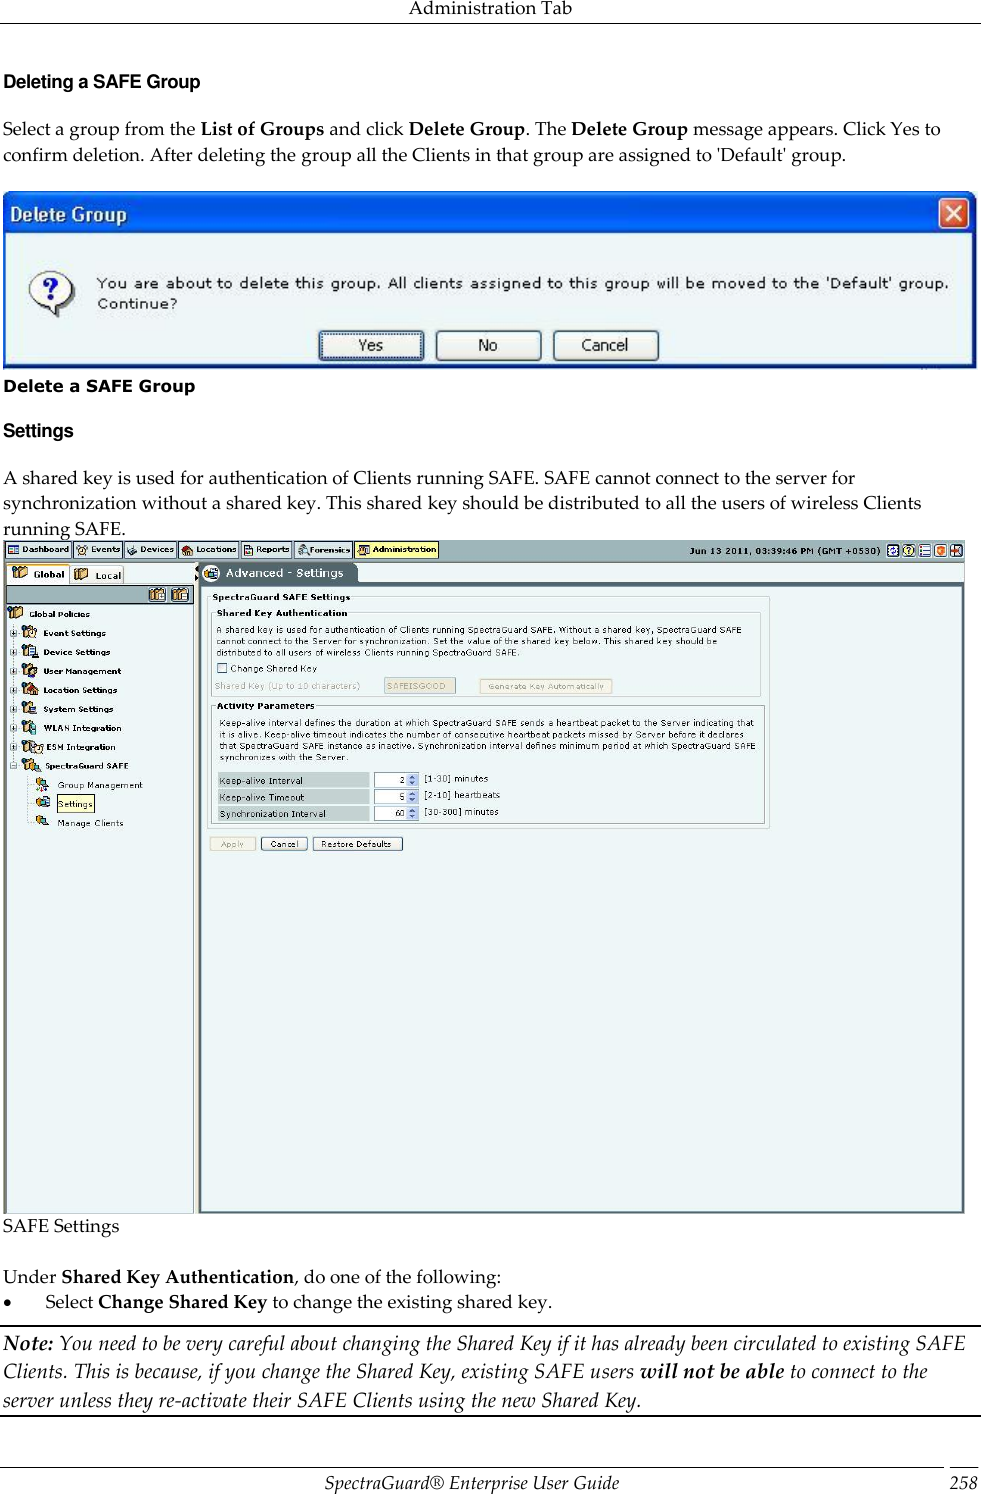 Administration Tab SpectraGuard®  Enterprise User Guide 258 Deleting a SAFE Group Select a group from the List of Groups and click Delete Group. The Delete Group message appears. Click Yes to confirm deletion. After deleting the group all the Clients in that group are assigned to &apos;Default&apos; group.    Delete a SAFE Group Settings A shared key is used for authentication of Clients running SAFE. SAFE cannot connect to the server for synchronization without a shared key. This shared key should be distributed to all the users of wireless Clients running SAFE.  SAFE Settings   Under Shared Key Authentication, do one of the following:          Select Change Shared Key to change the existing shared key. Note: You need to be very careful about changing the Shared Key if it has already been circulated to existing SAFE Clients. This is because, if you change the Shared Key, existing SAFE users will not be able to connect to the server unless they re-activate their SAFE Clients using the new Shared Key. 